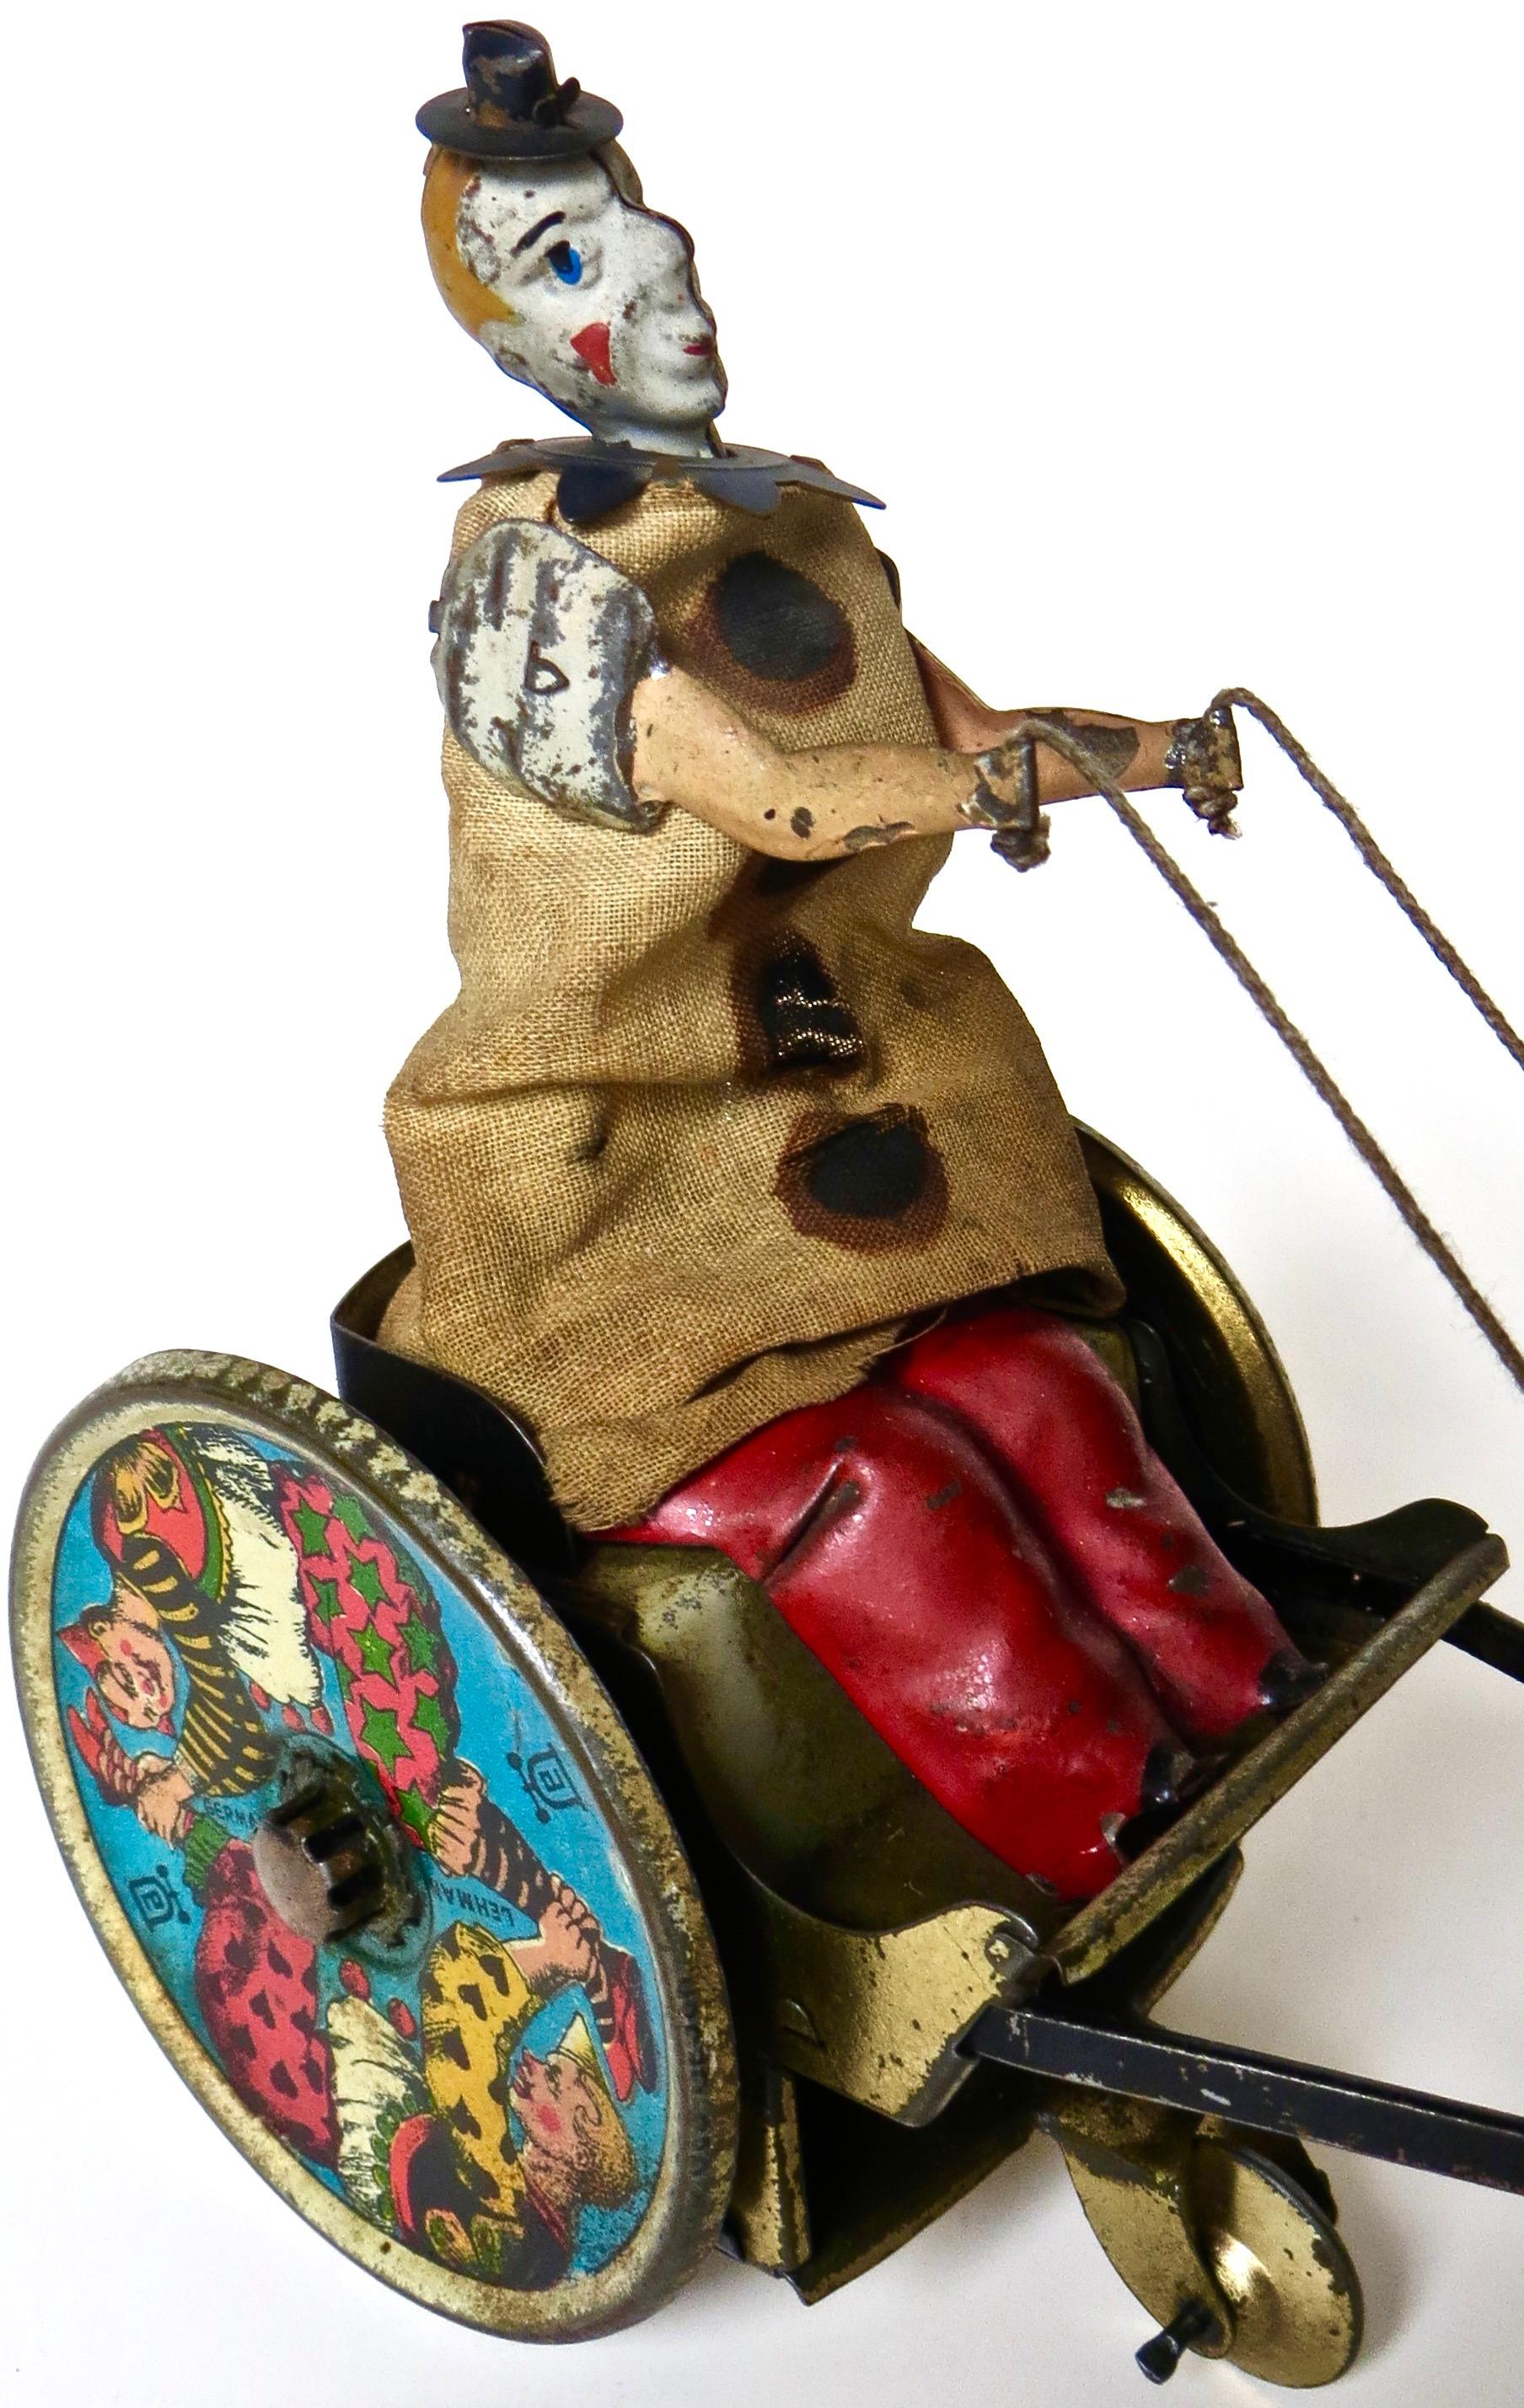 Hand-Crafted German Tinplate Clockwork Wind Up Toy by the Lehman Co. 